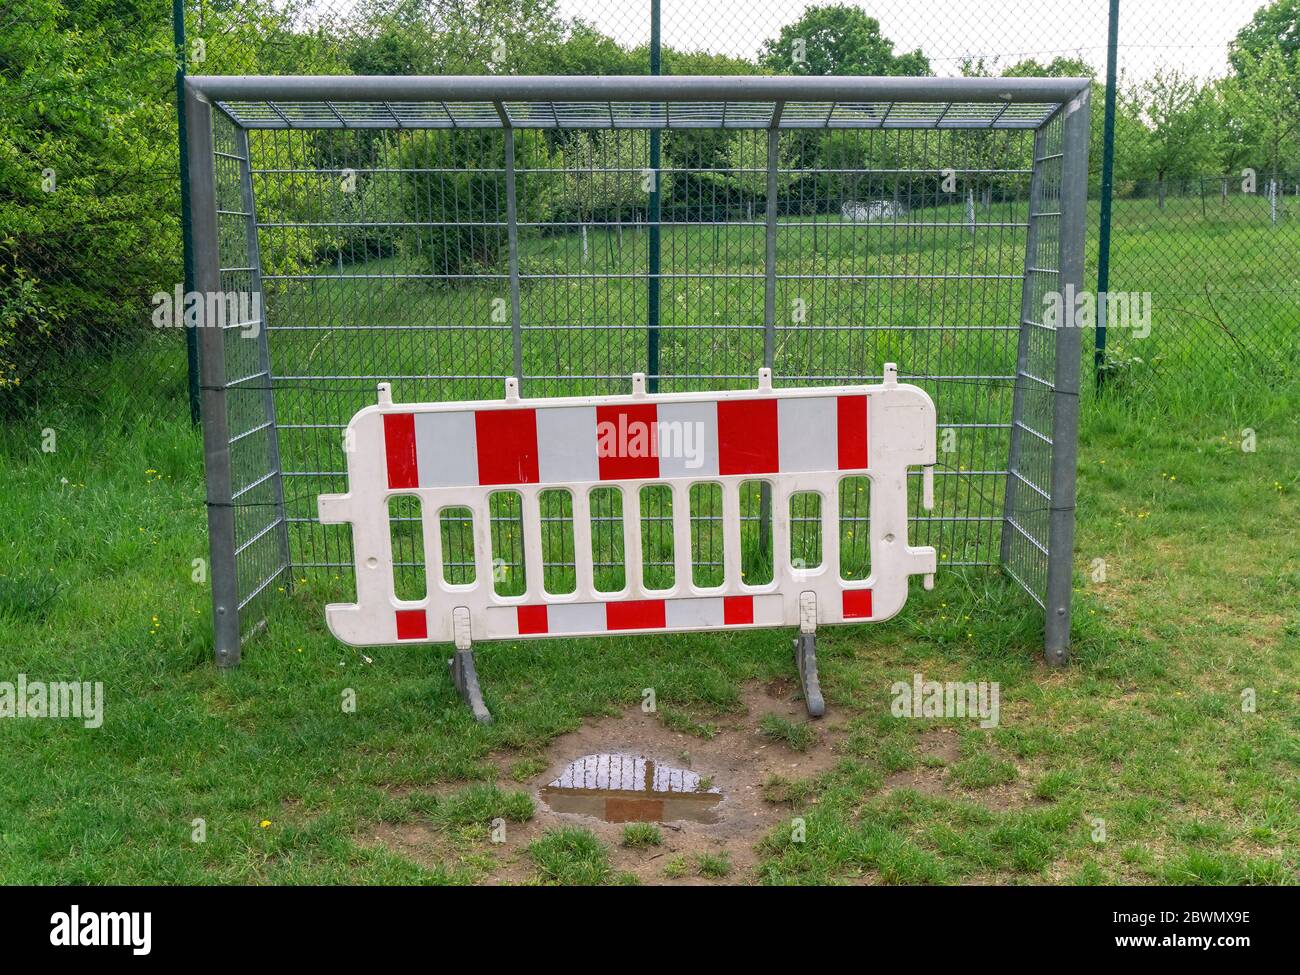 Gate on a football field which is closed with a barrier during the Corona pandemic. Stock Photo